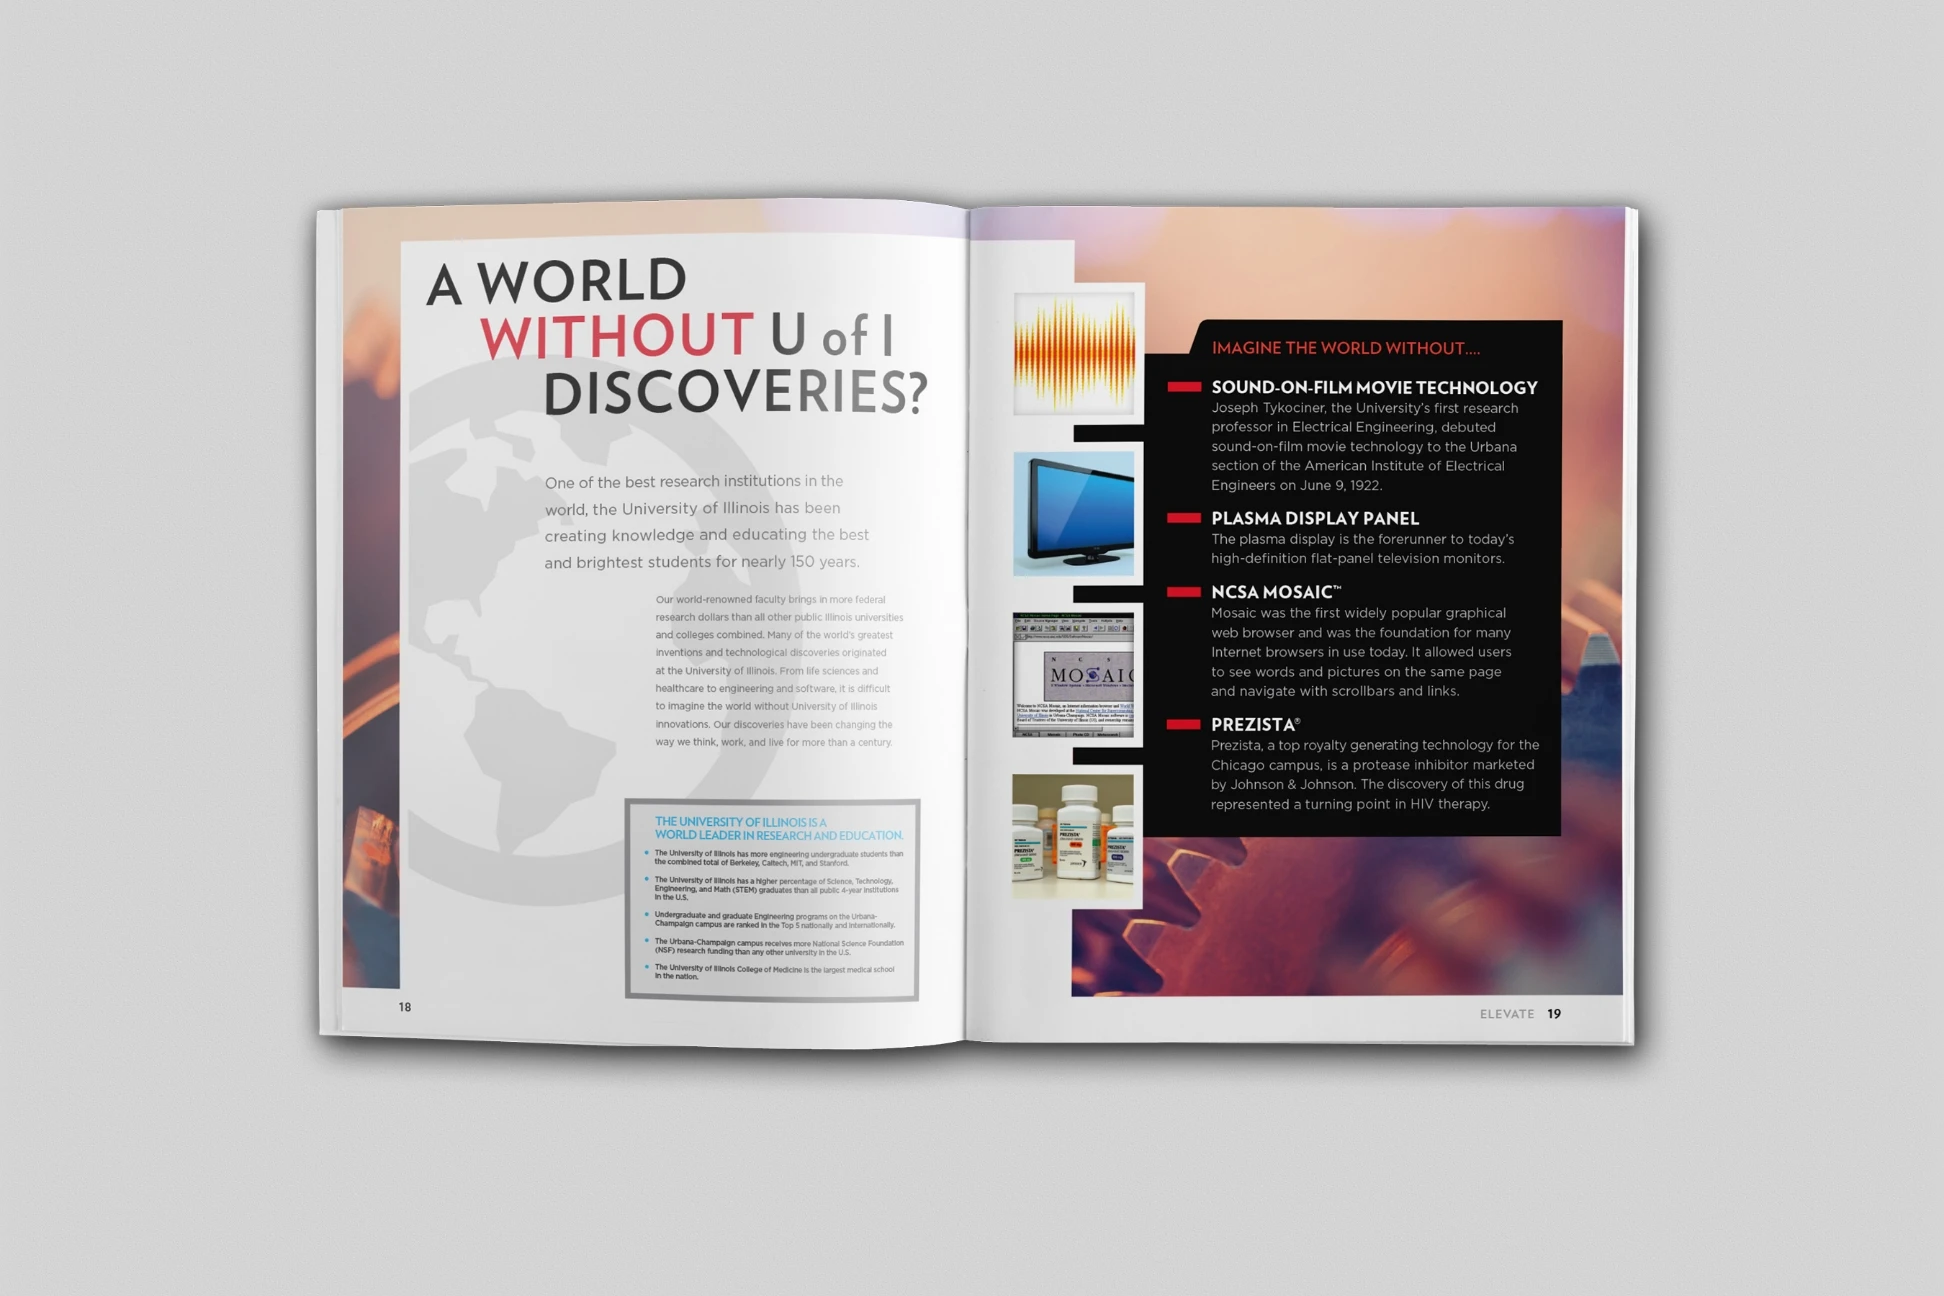 A magazine spread with an image of a world without discovery.